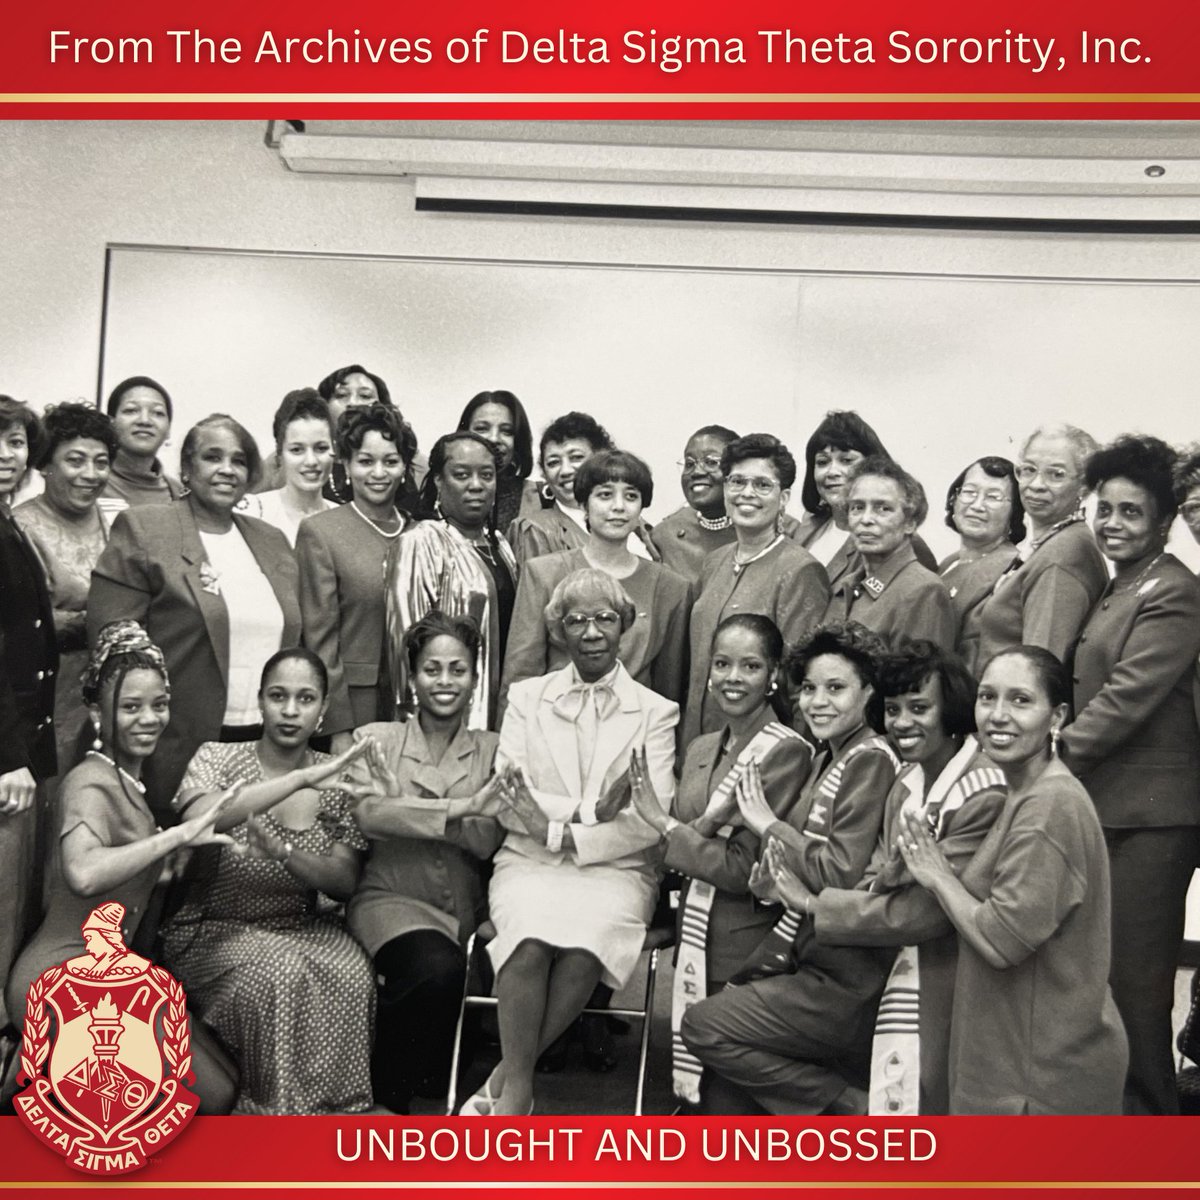 Today we celebrate the life of our unbought and unbossed soror, Congresswoman Shirley Chisholm! #DST1913 #DSTHeritageMoment #DeltaThroughTheDecades